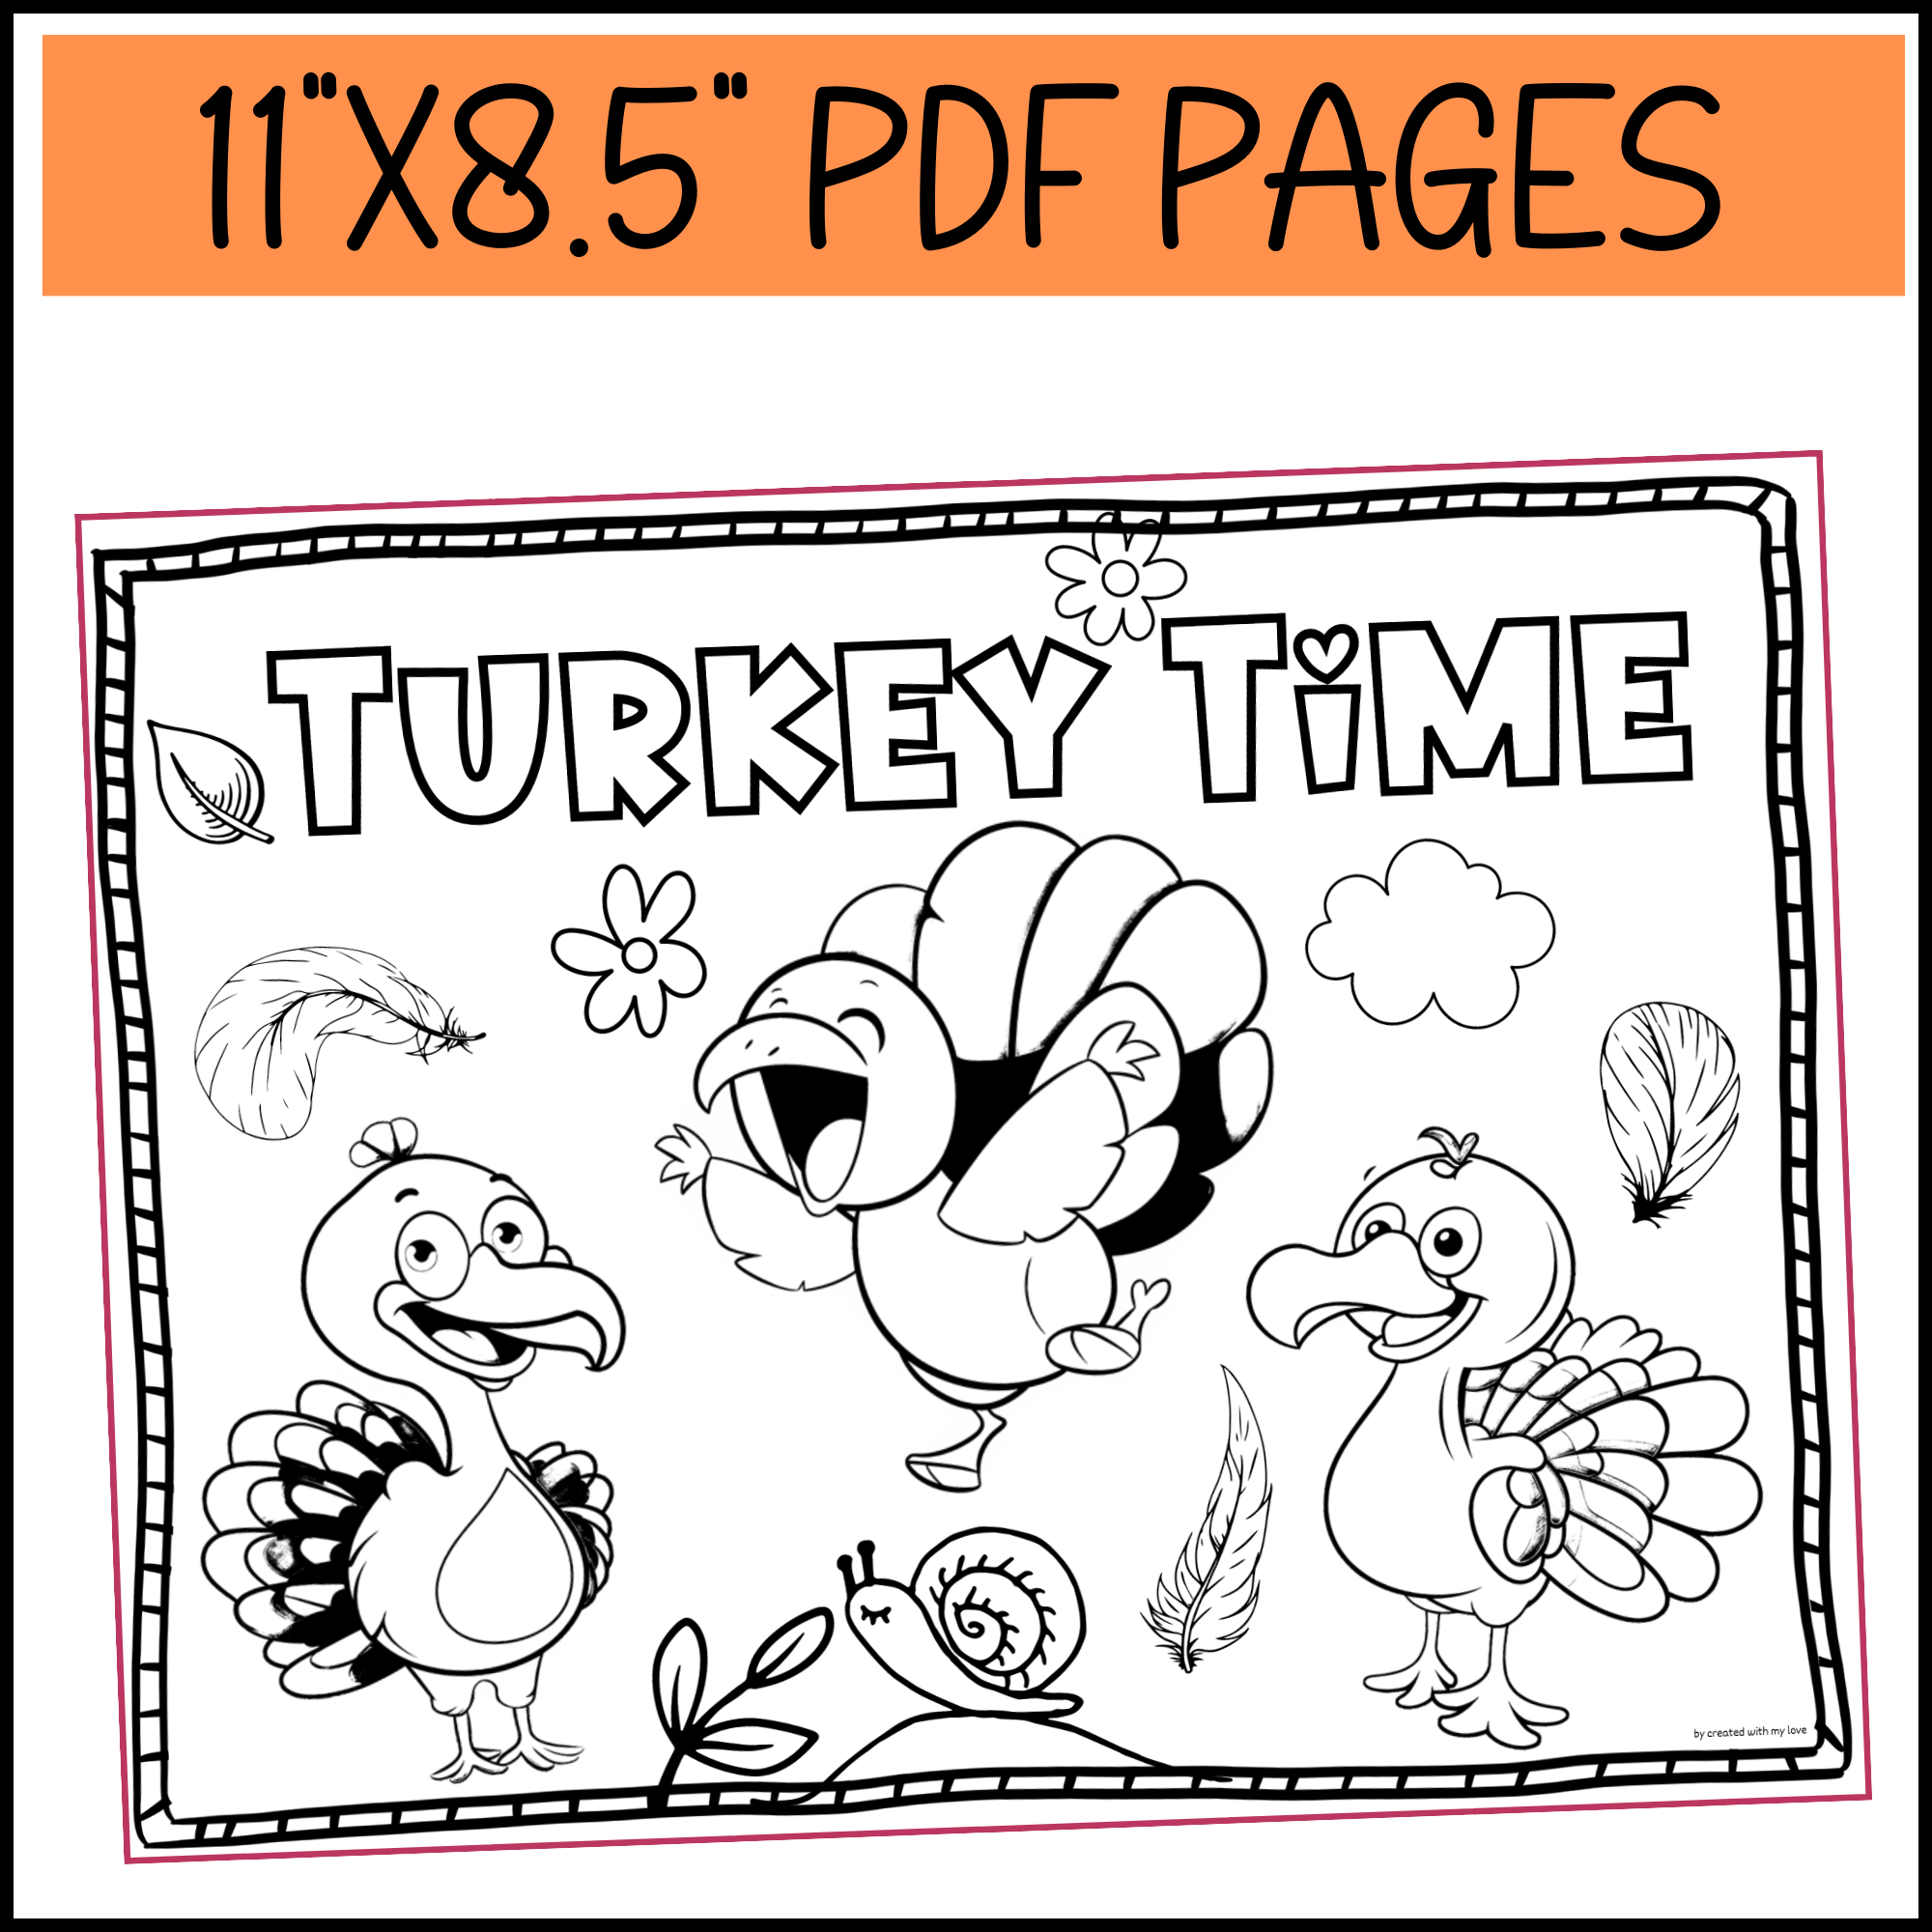 Thanksgiving turkey coloring pages activity writing prompt morning work made by teachers